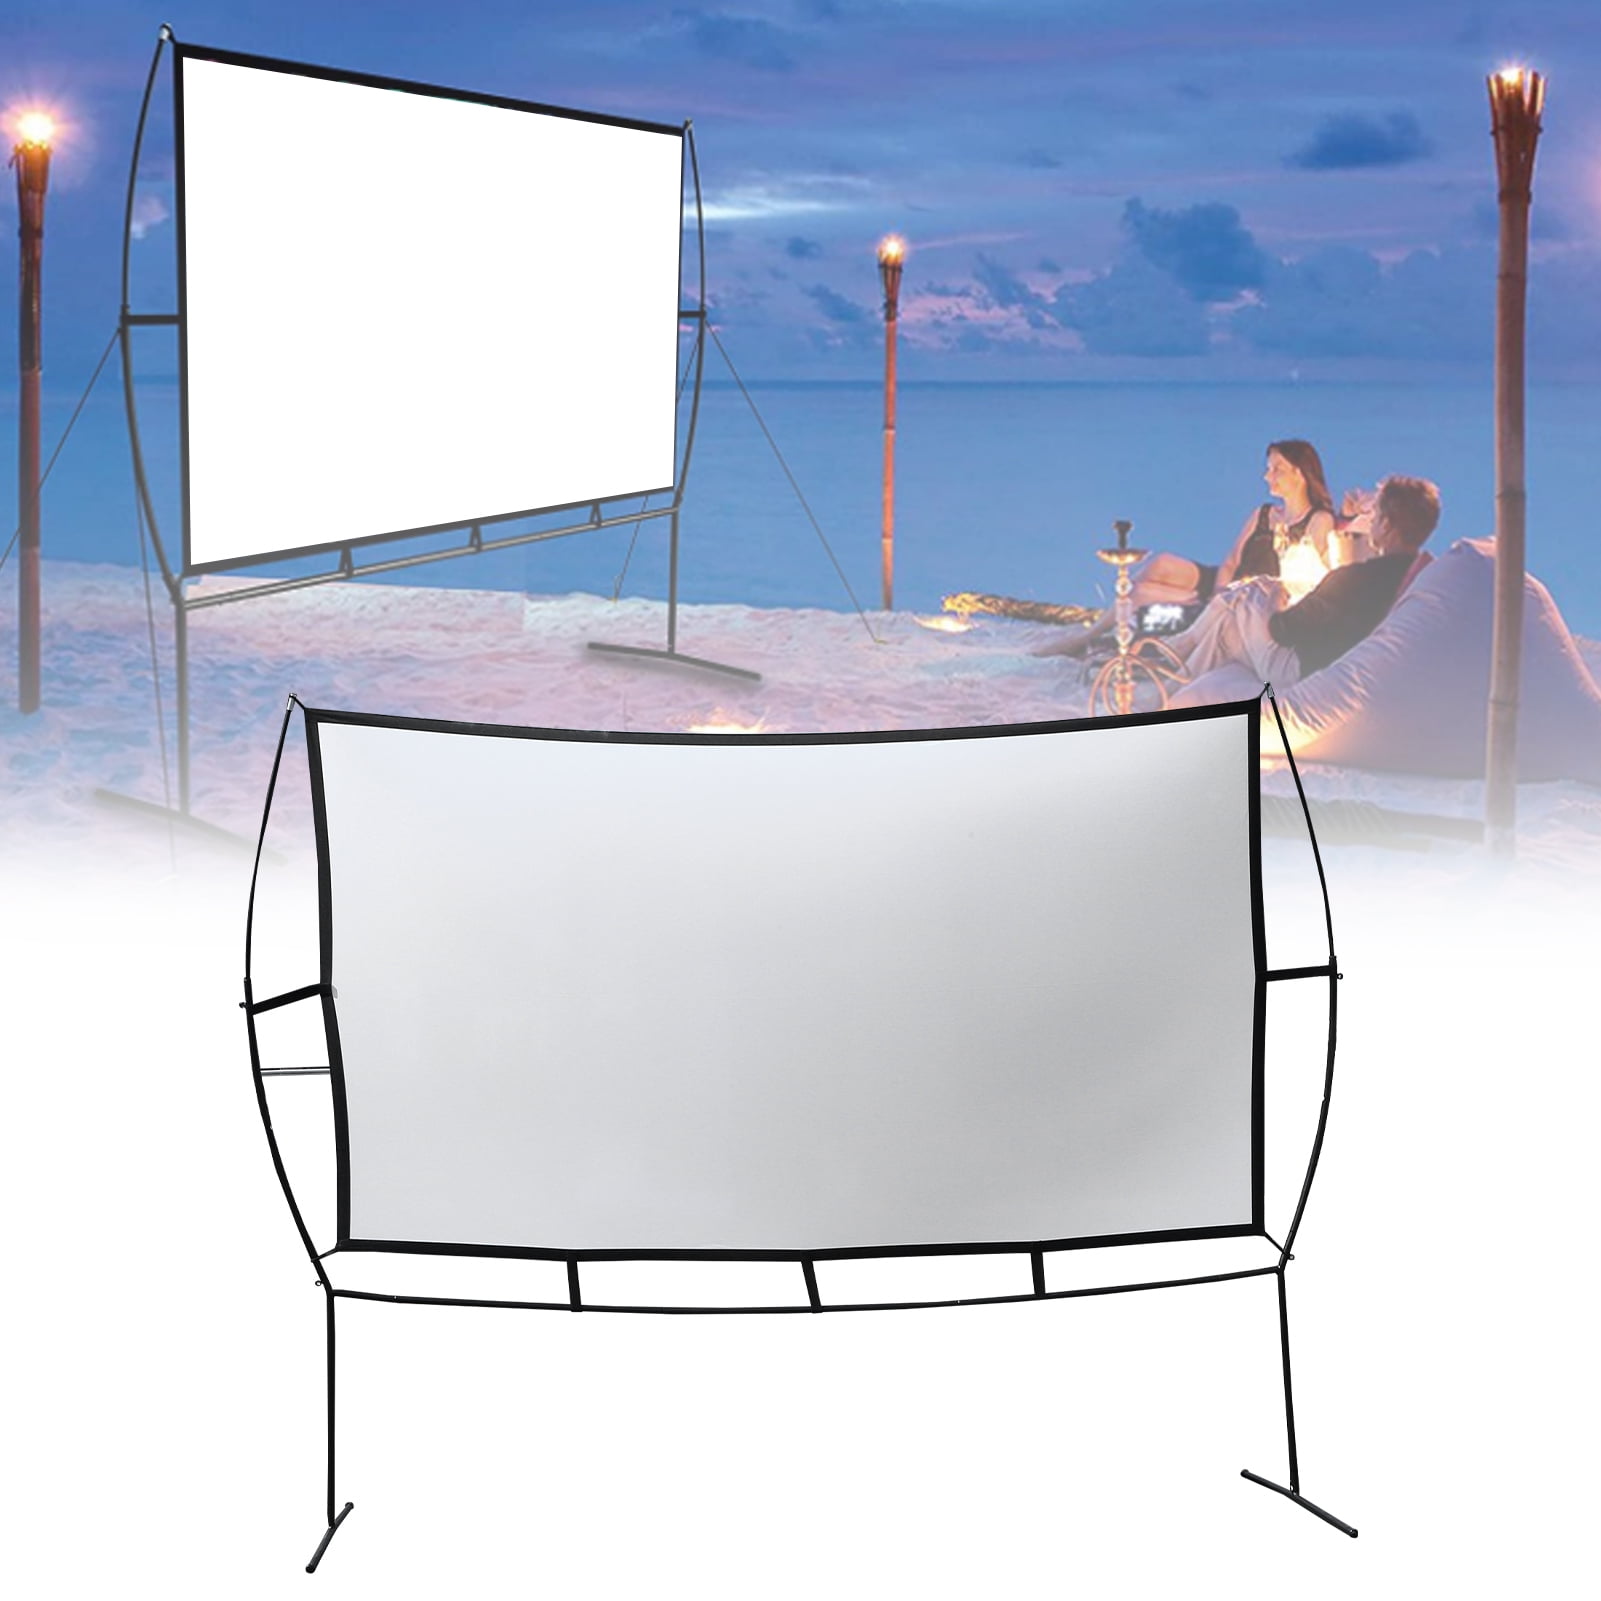 AAJK Projection Screen 100-inch 4k Video Projection Screen Camping Light-Proof Projection Screen 16:9 HD Foldable Rear Projection Screen Portable Movie Screen 